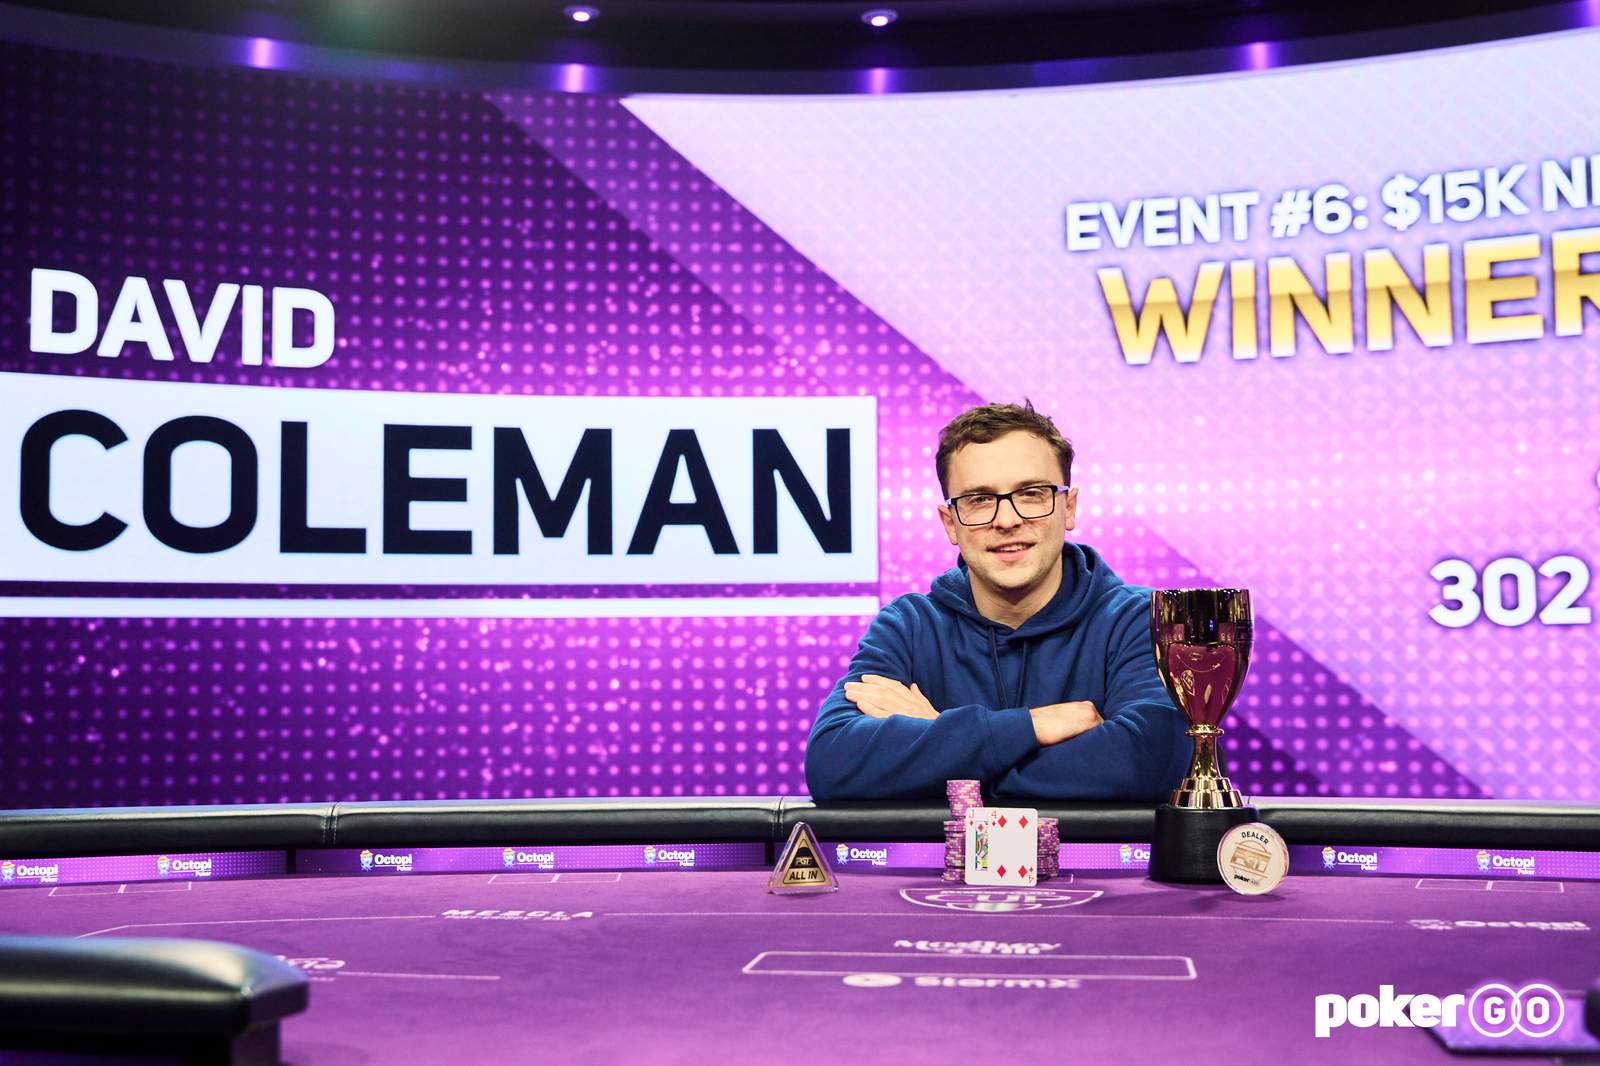 David Coleman Captures First Major PGT Title and $302,400 in Event #6: $15,100 No-Limit Hold'em